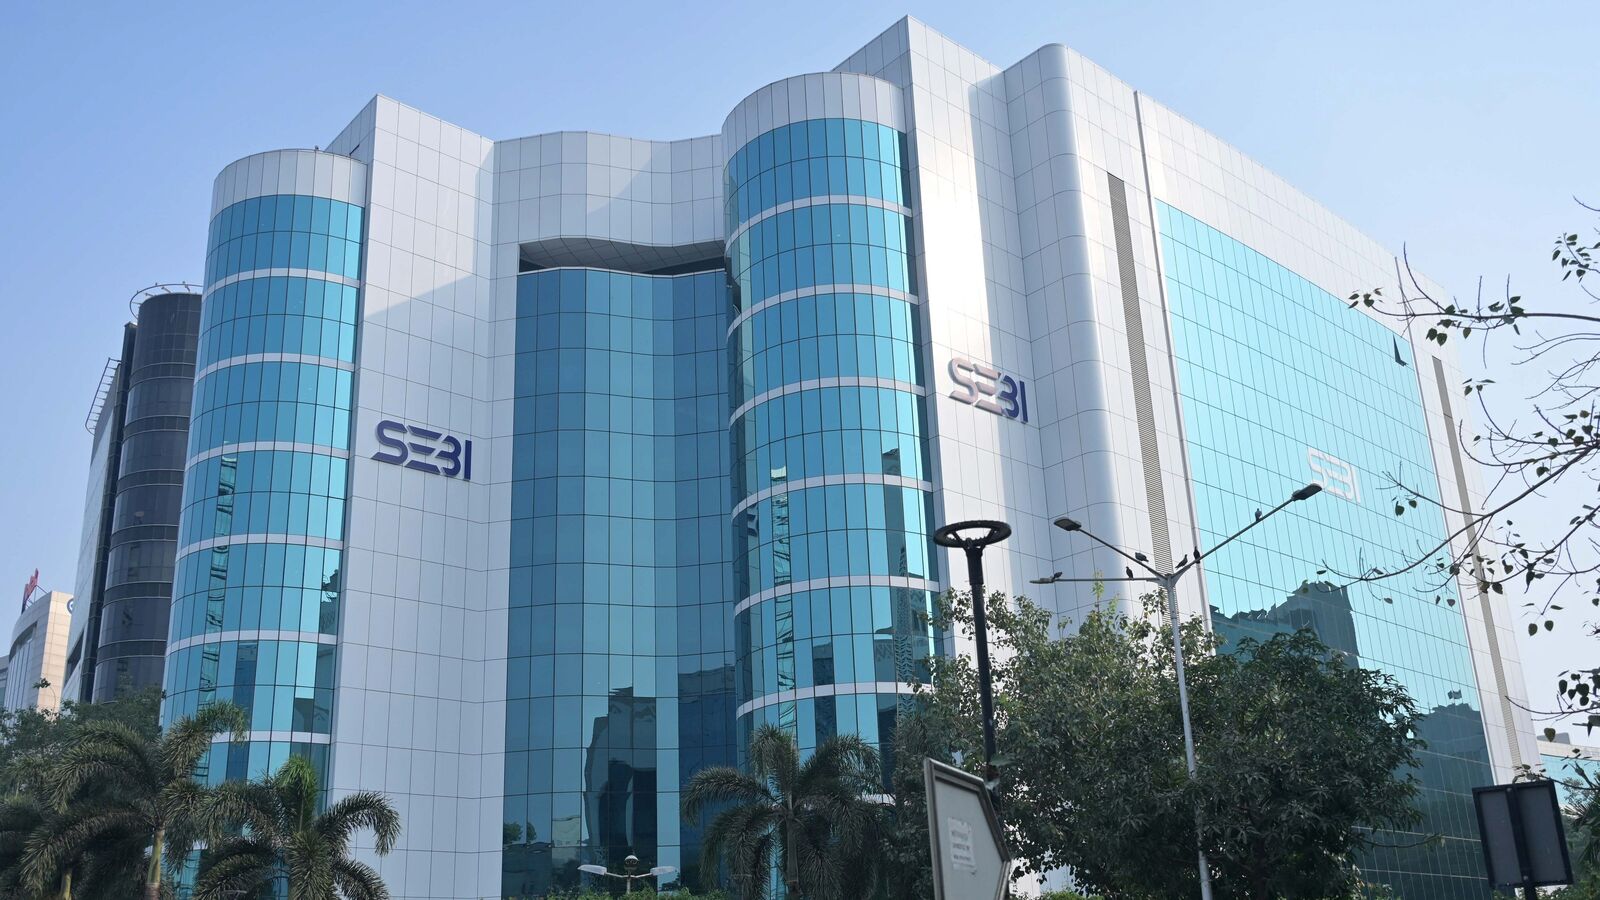 SEBI introduces new regulations for sharing of real-time price data with third parties